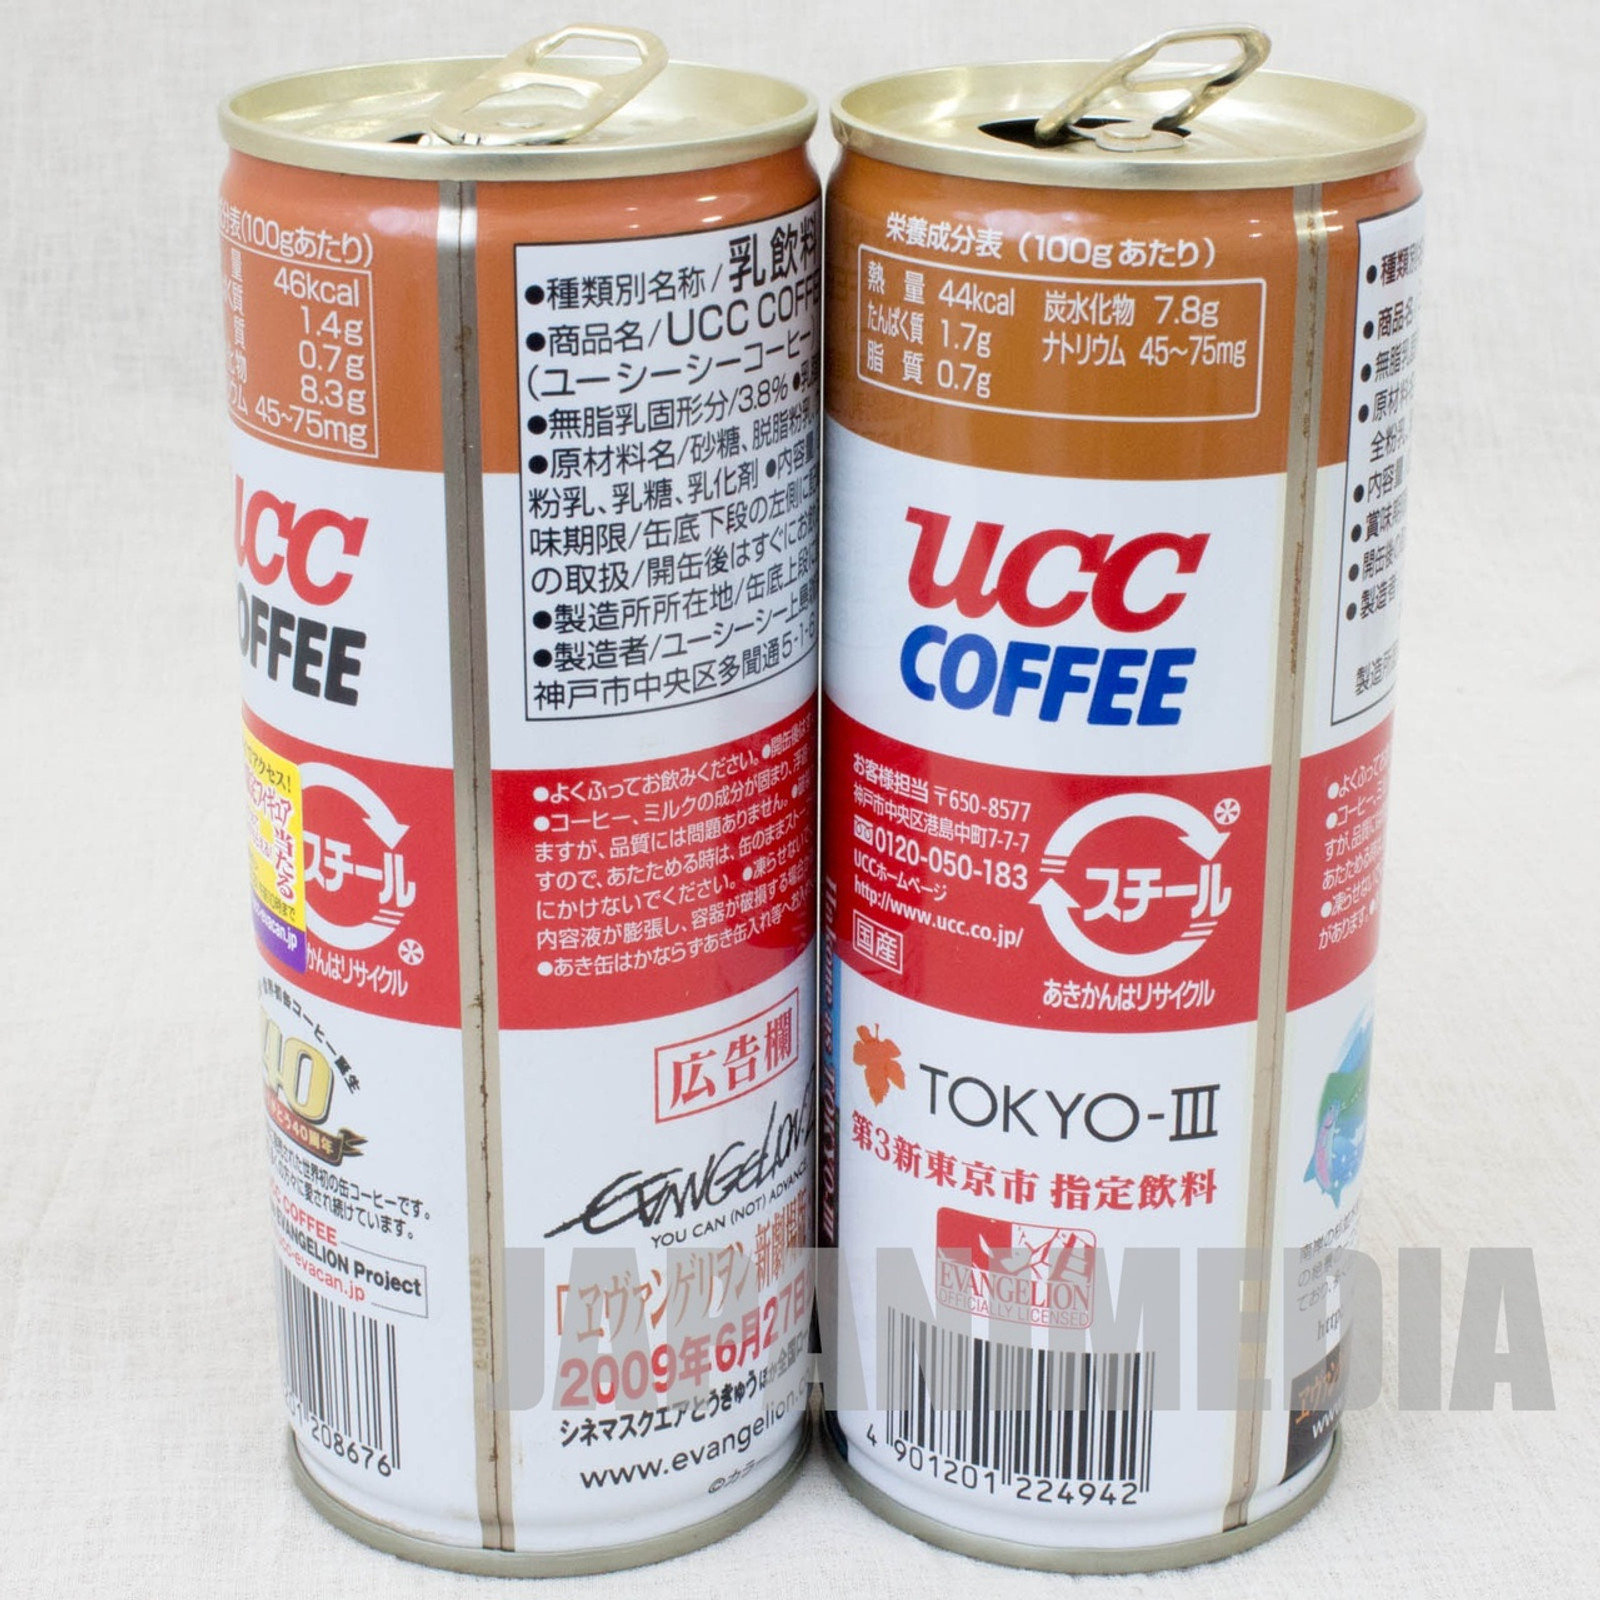 Set of 2 Evangelion UCC Steel Can Coffee Rei Ayanami